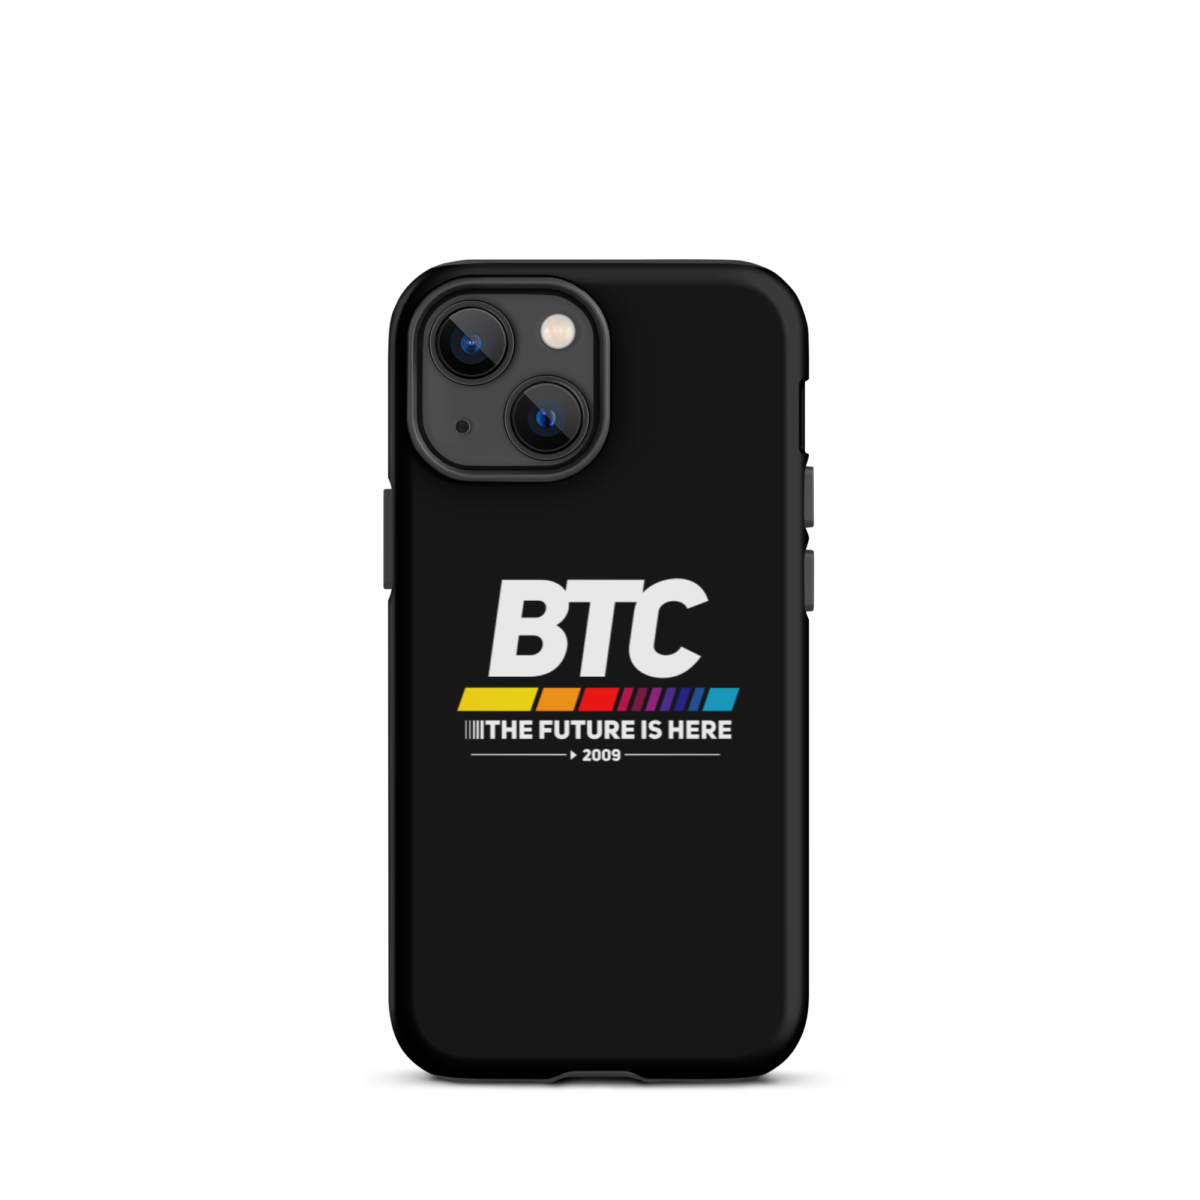 tough iphone case glossy iphone 13 mini front 6345d56a31268 - BTC: The Future Is Here Tough iPhone Case